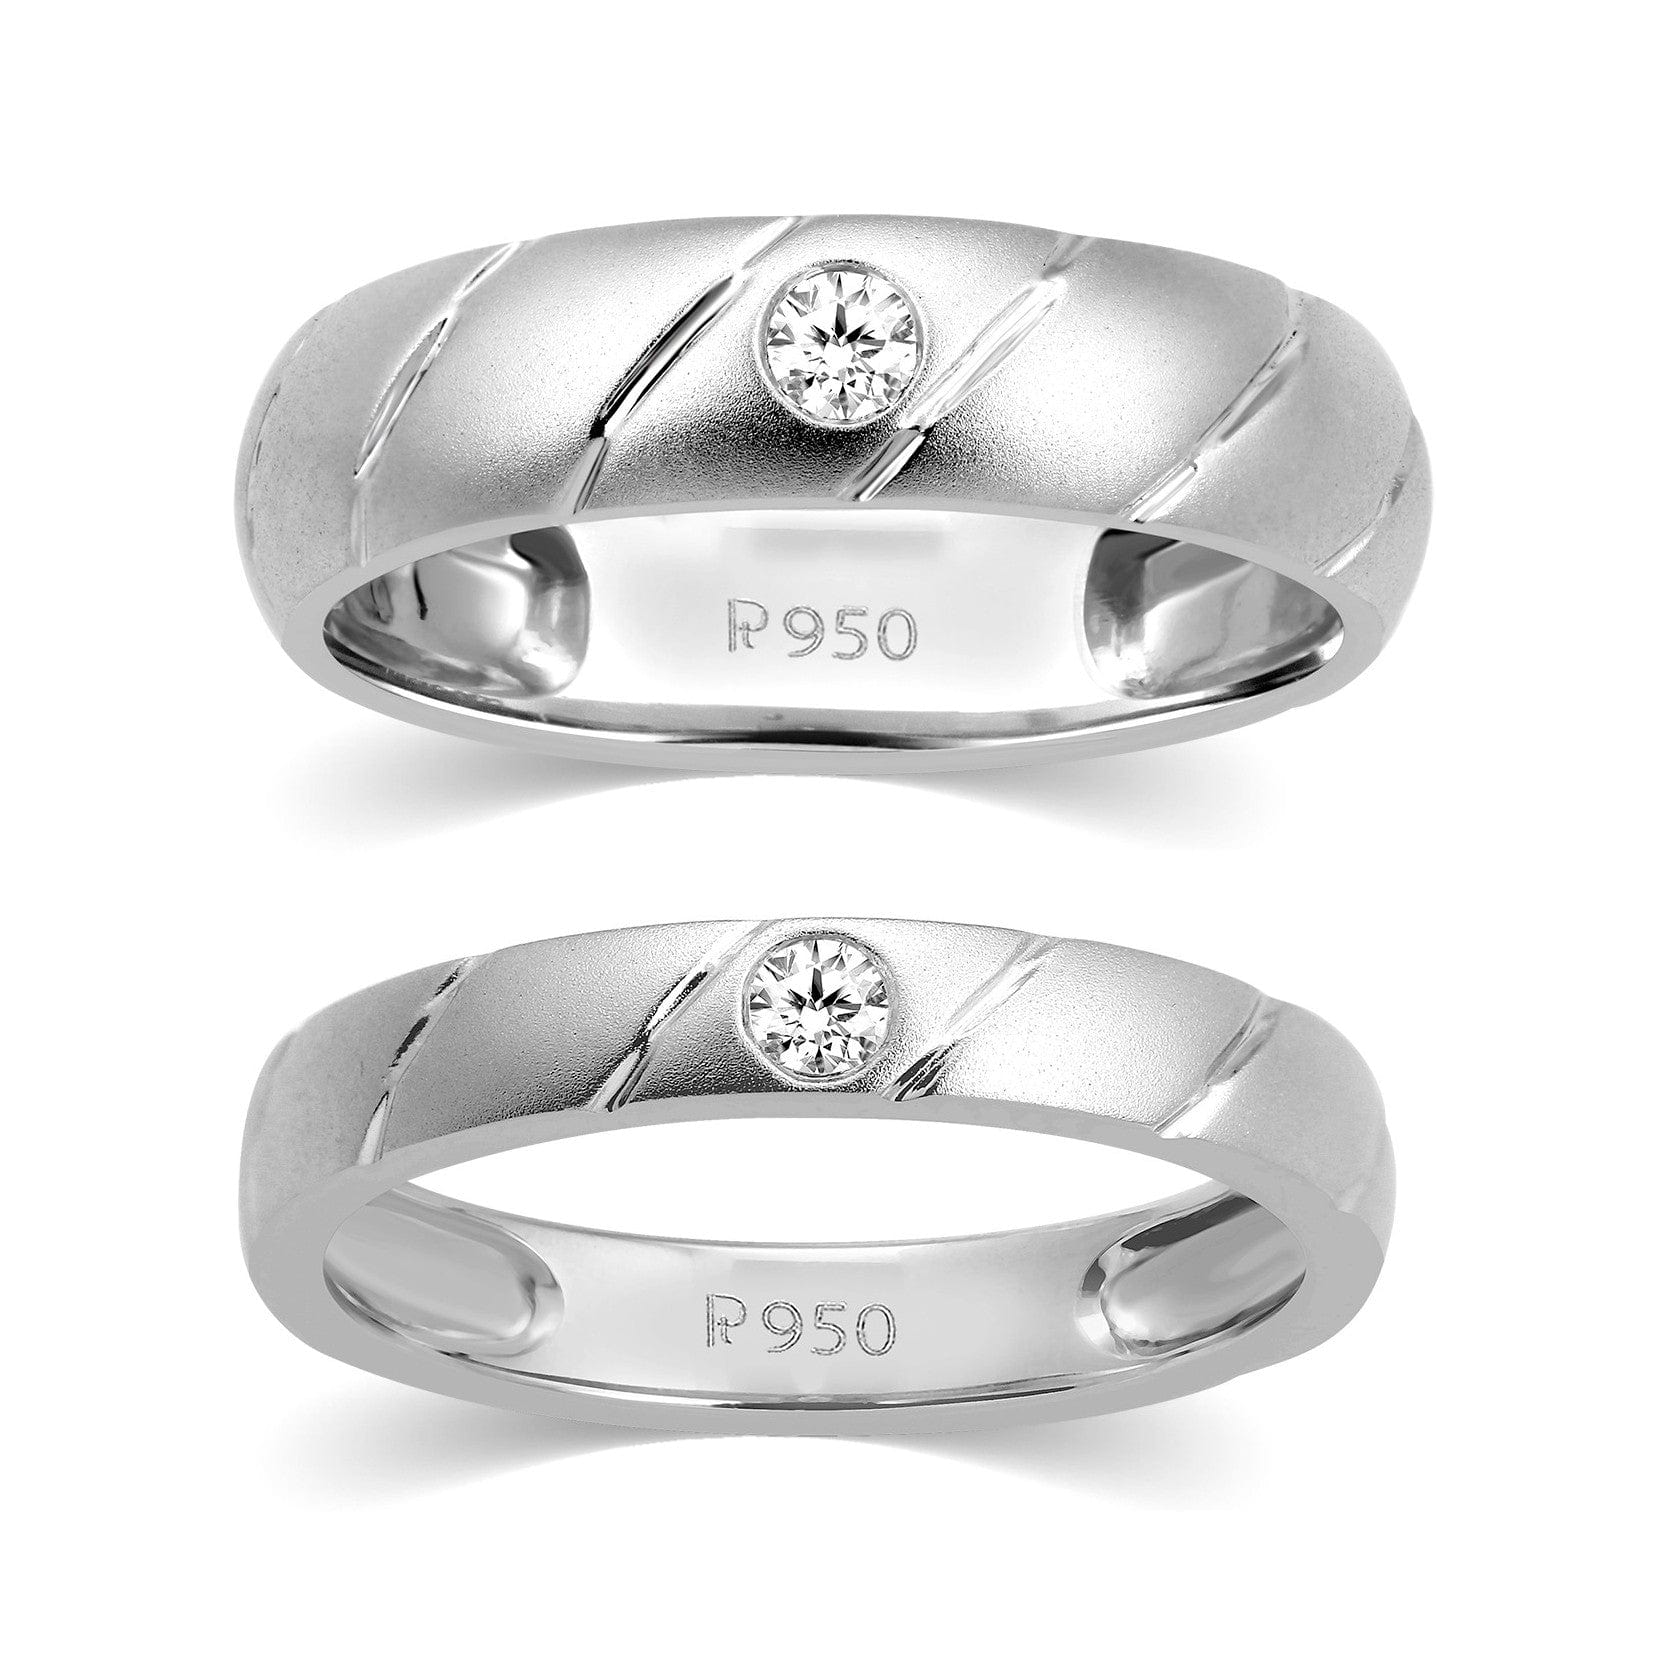 Our Love Is Written In The Stars Personalized Platinum Plated Wedding Ring  Set Featuring Over 5 Carats Of Simulated Stones - Per